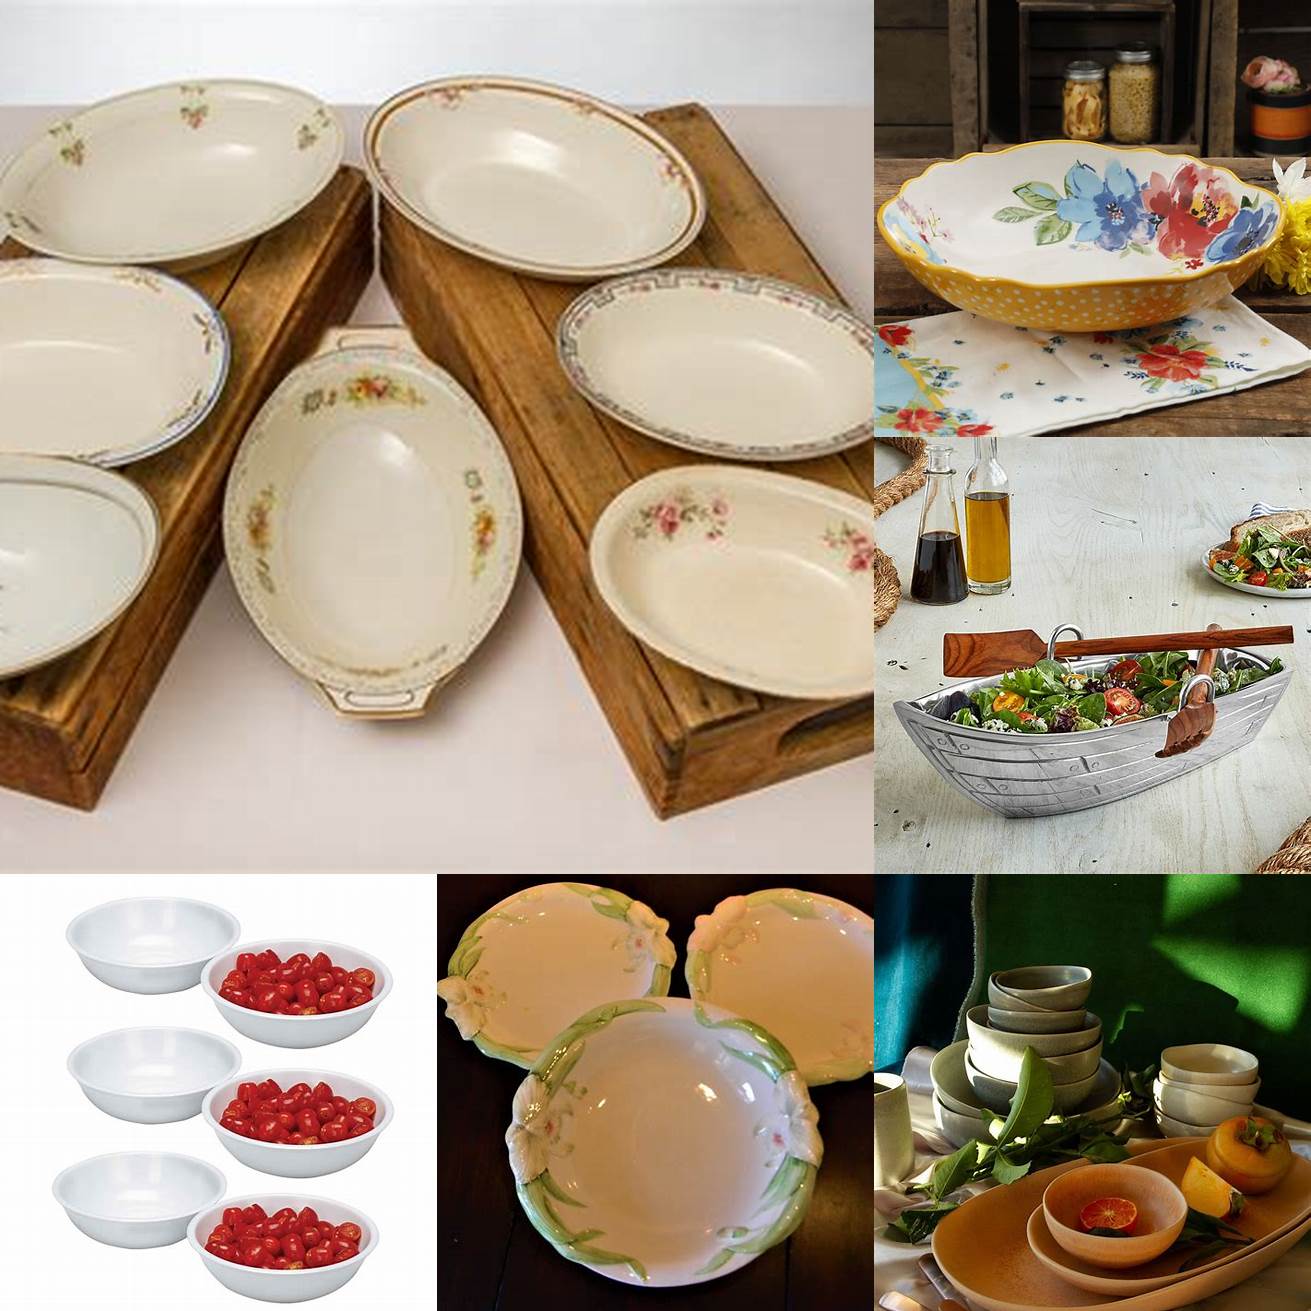 Serving platters and bowls filled with hearty family-style dishes